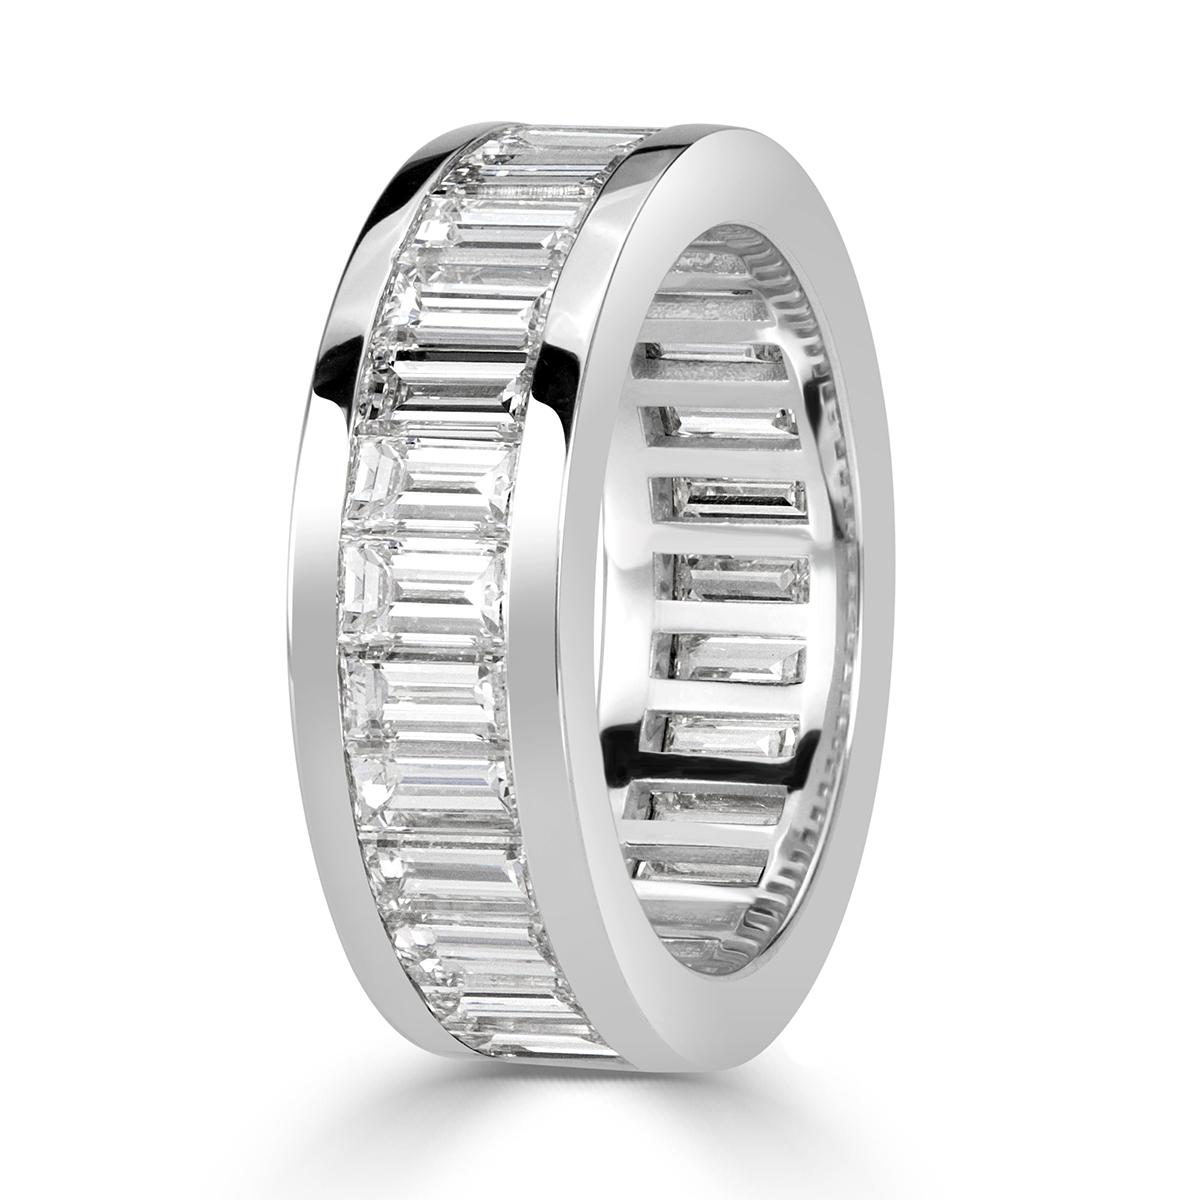 This gorgeous diamond eternity band showcases 4.97ct of perfectly matched baguette cut diamonds channel set in high polish platinum. The diamonds are each hand selected and graded at F-G in color, VVS2-VS1 in clarity. All eternity bands are shown in